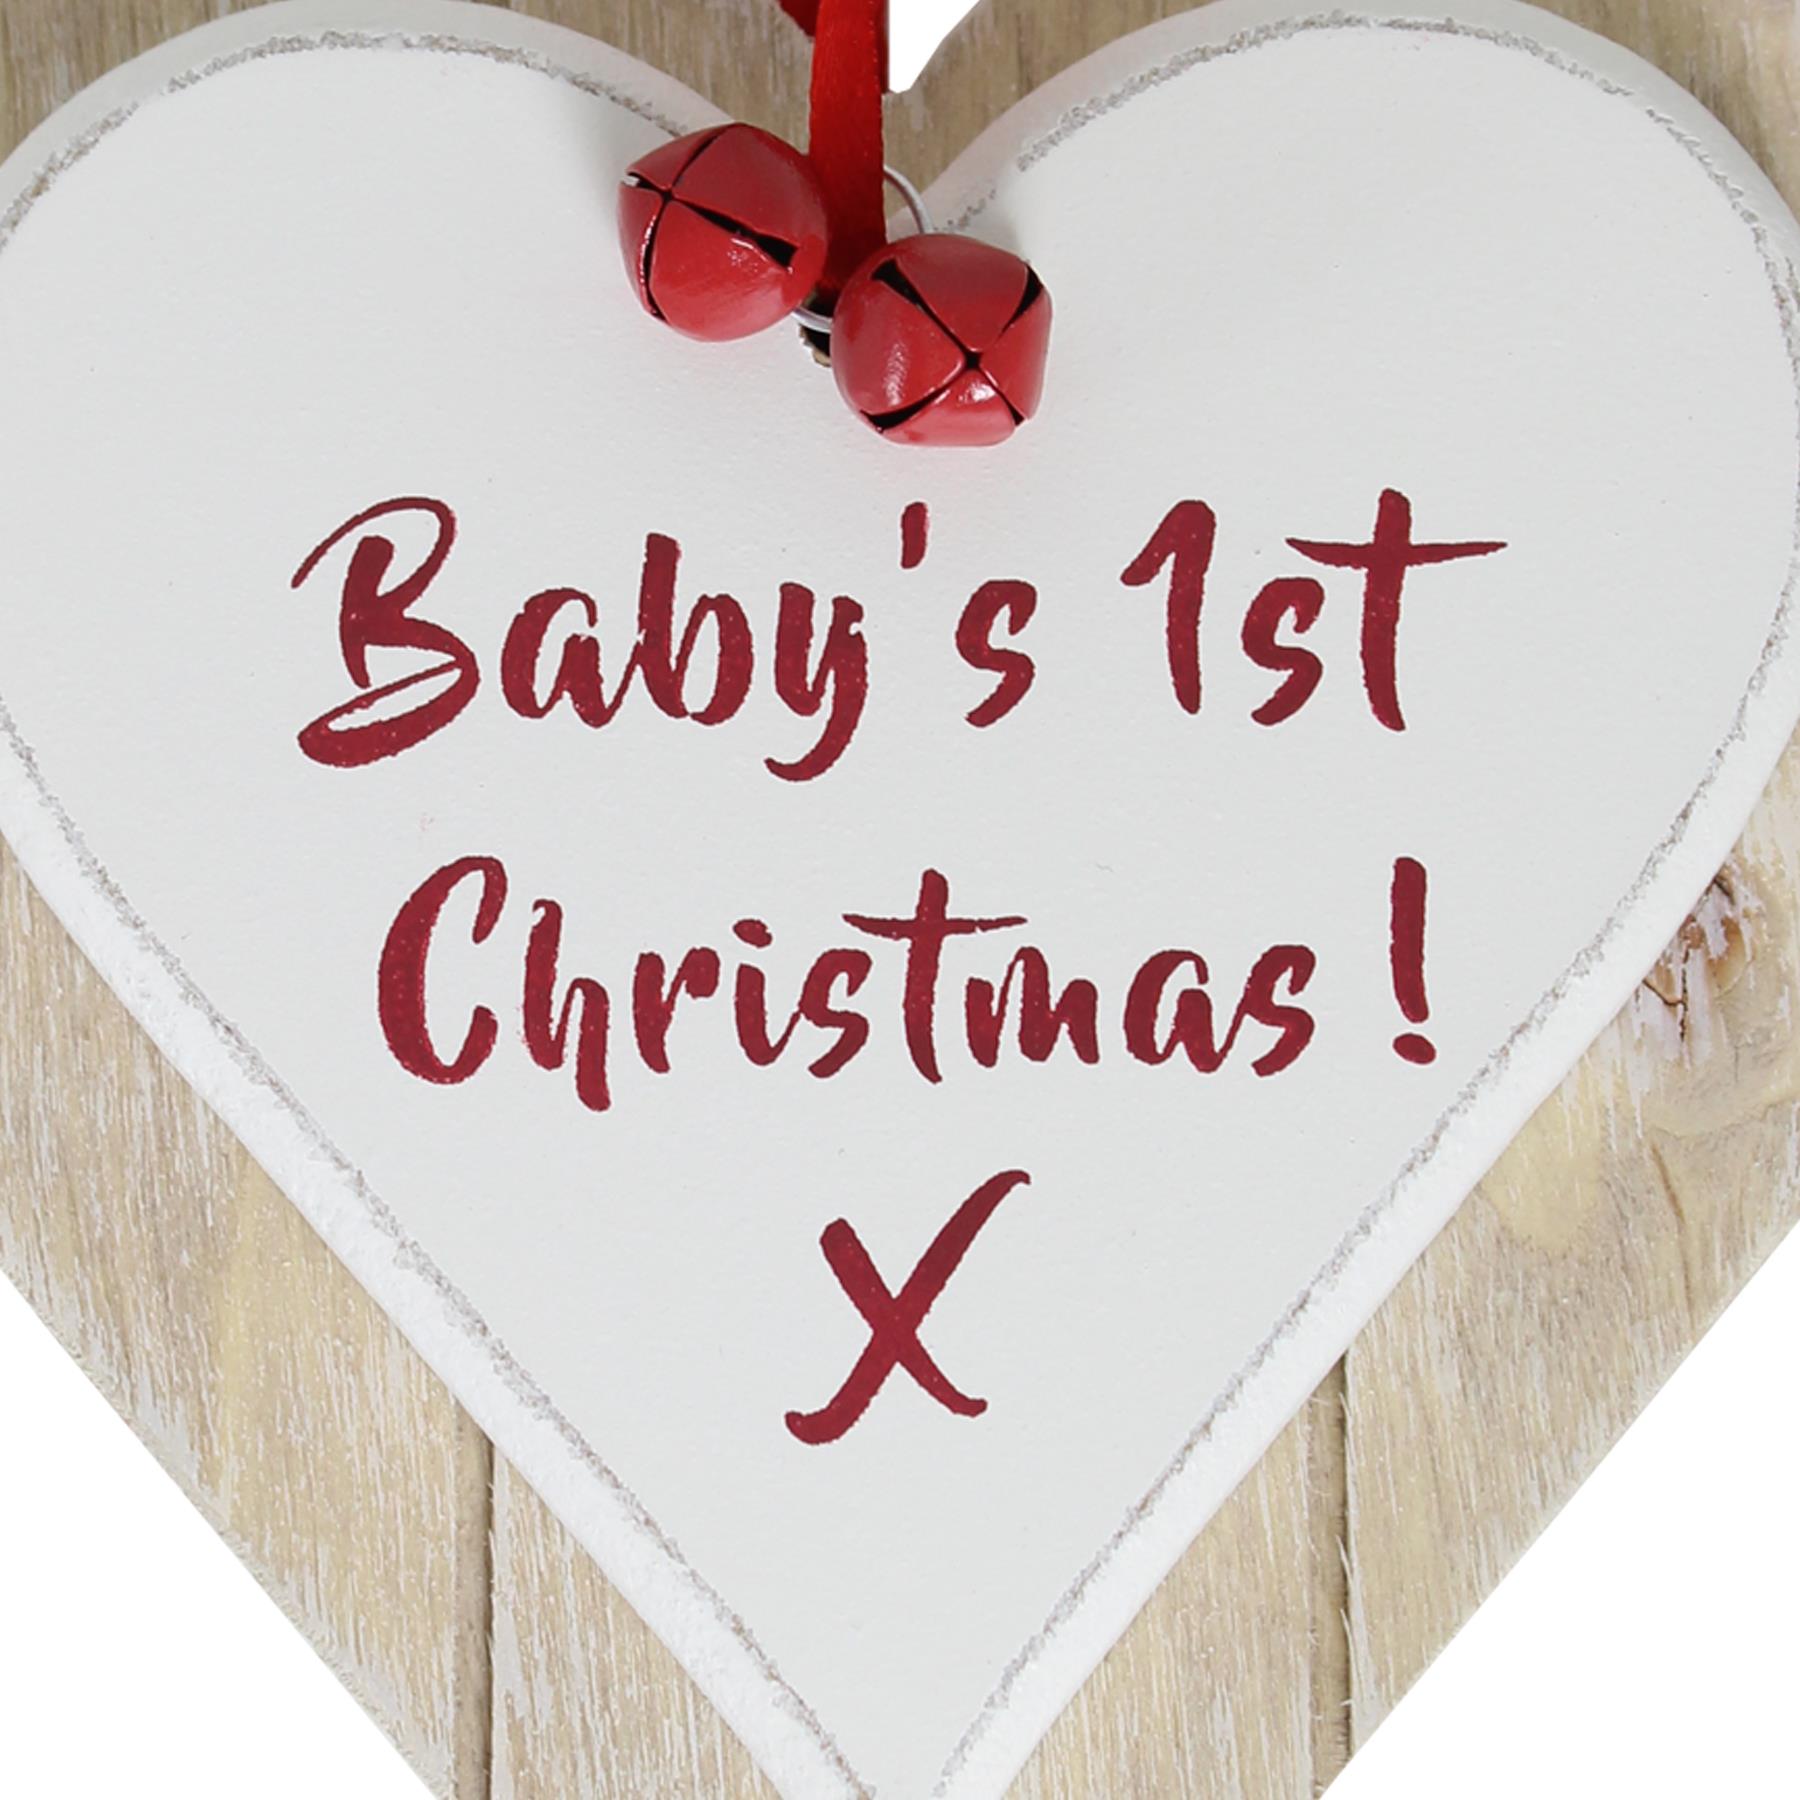 Double Layer Wooden Hanging Shabby Chic Heart Plaque - Baby's 1st Christmas